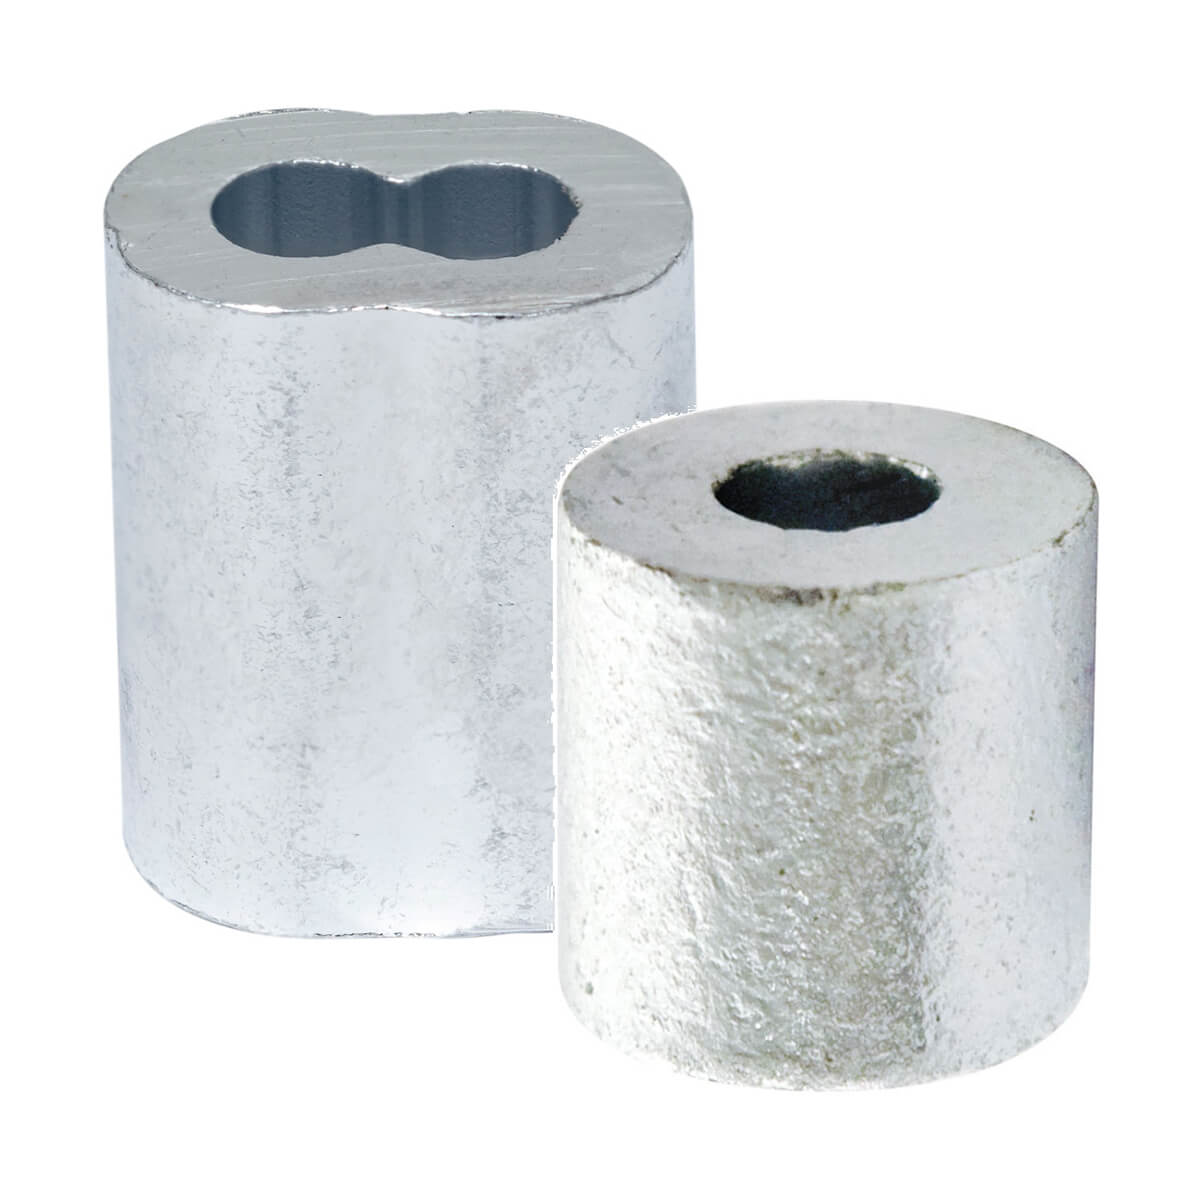 Aluminum Sleeve and Cable Stop - 3/32-in - 4 pack